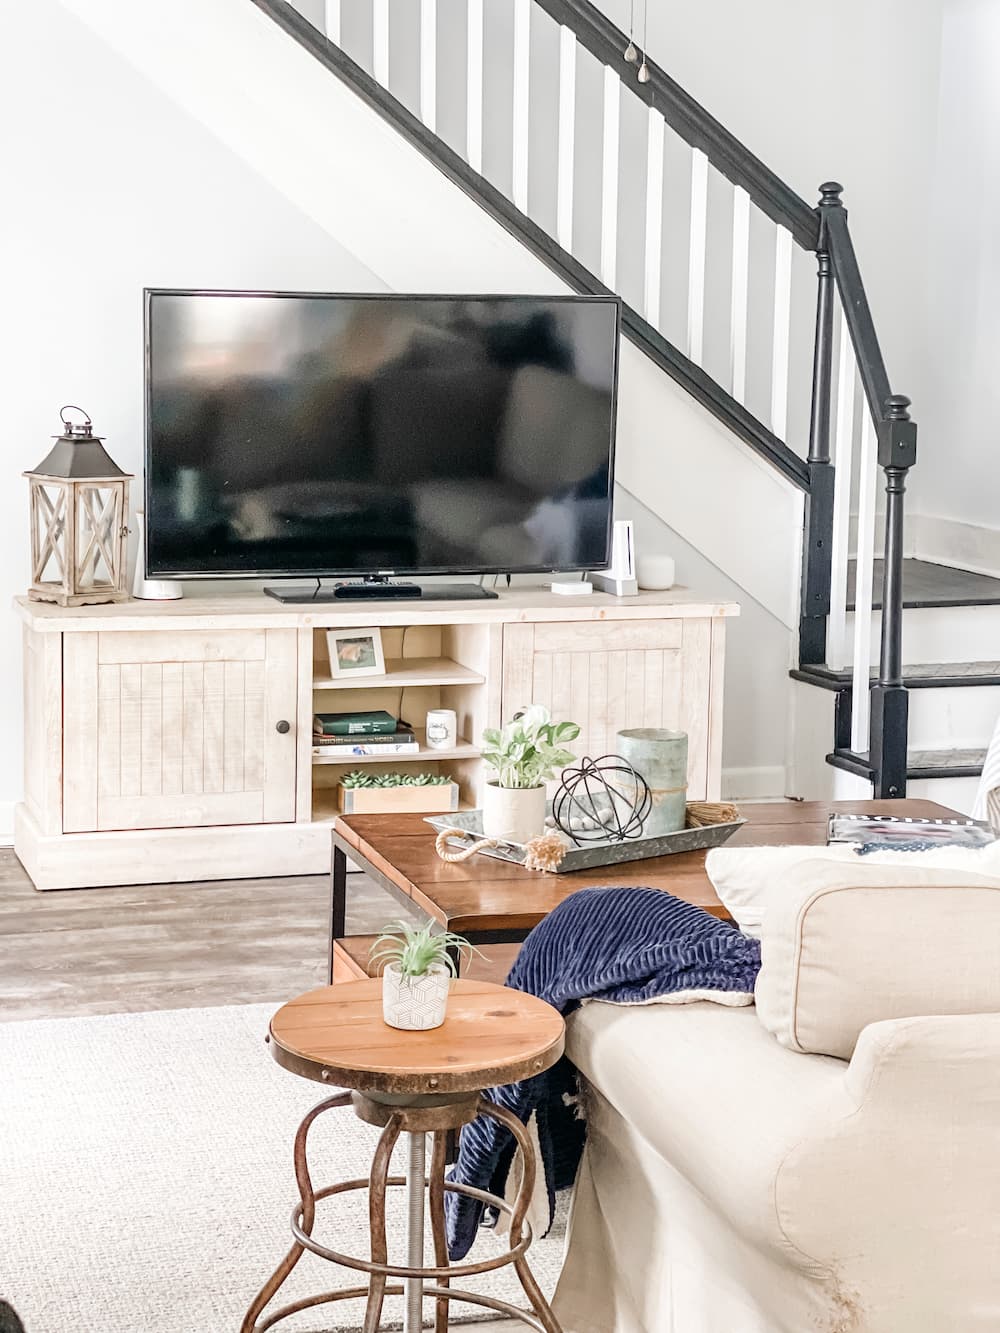 tv on stand in front of black and white steps and view of coffee table